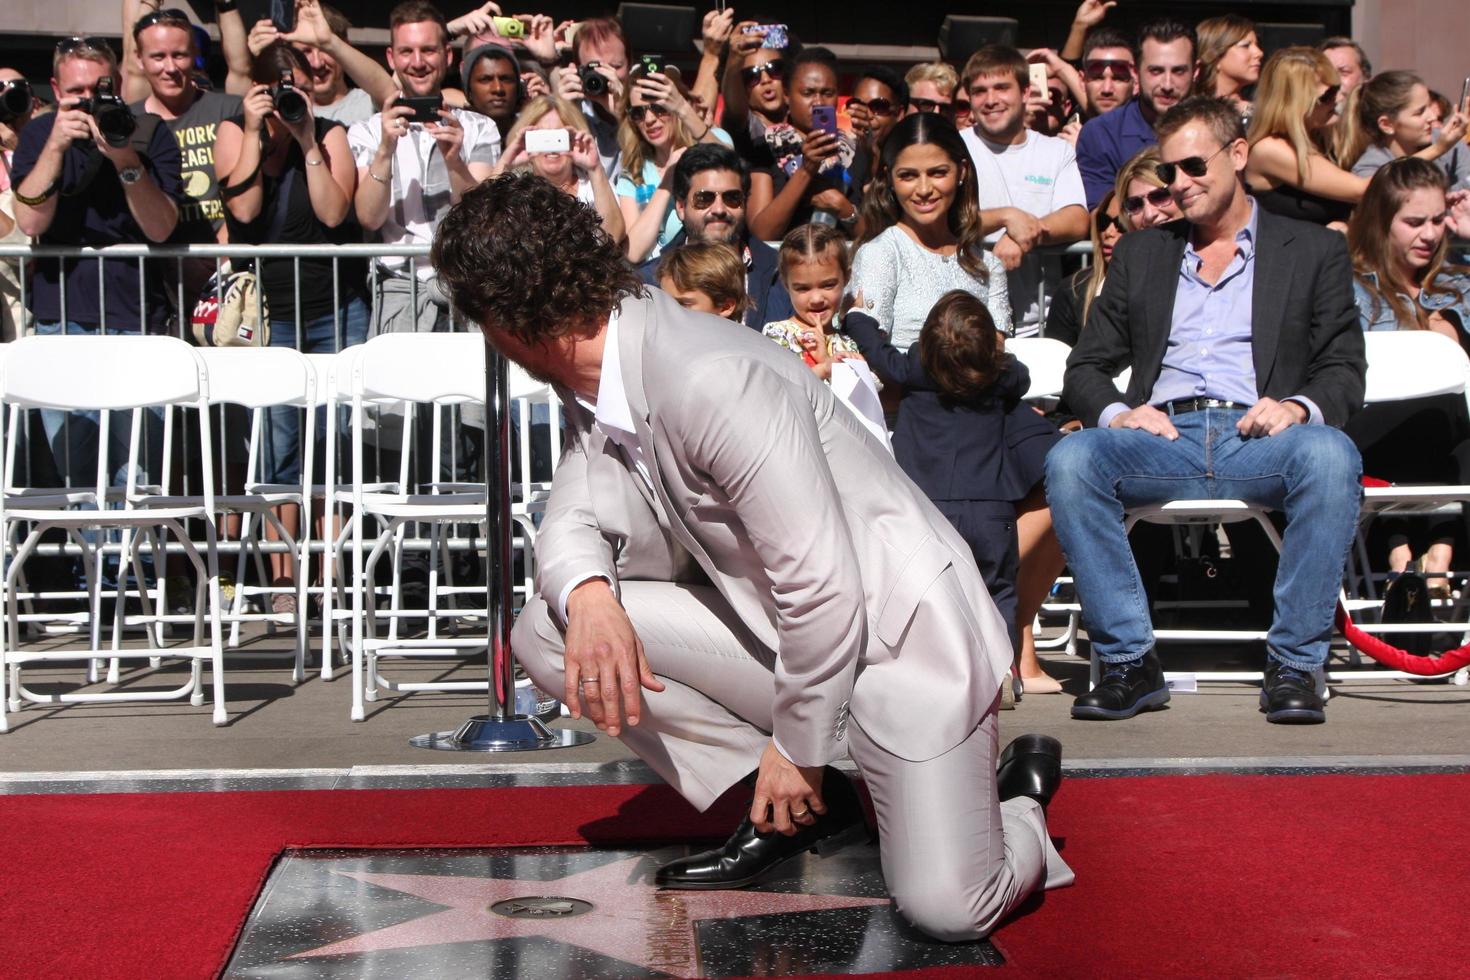 LOS ANGELES, NOV 17 - Matthew McConaughey, family in background at the Matthew McConaughey Hollywood Walk of Fame Star Ceremony at the Hollywood and Highland on November 17, 2014 in Los Angeles, CA photo